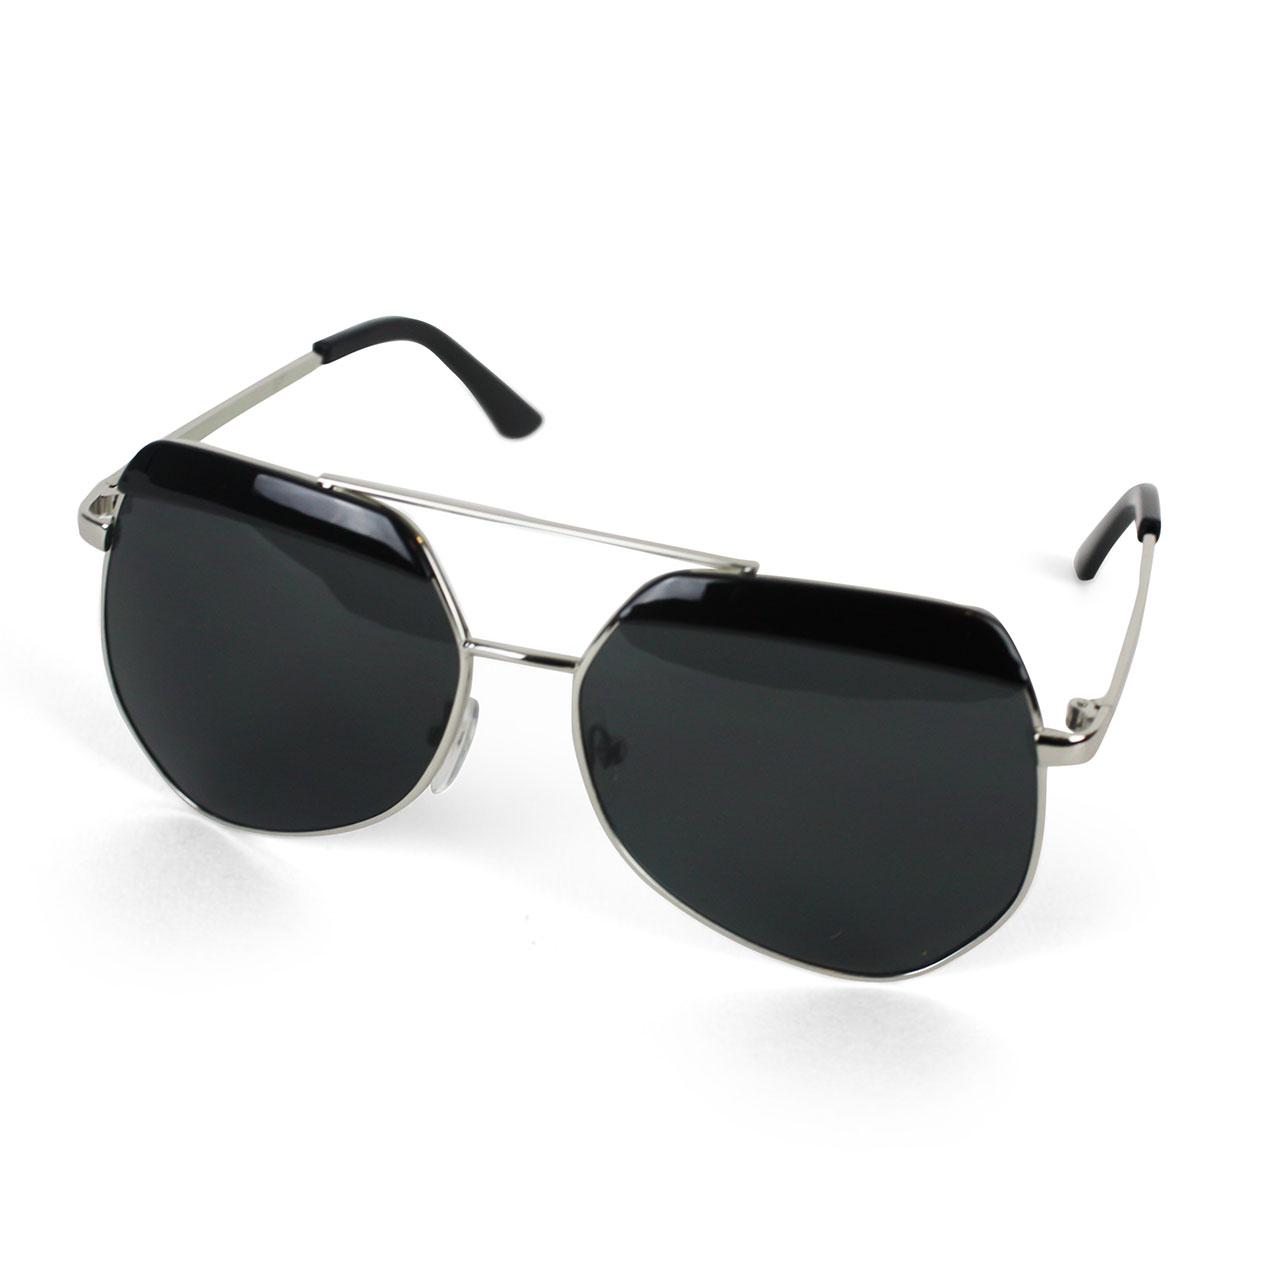 Men's Black Aviators Sunglasses Silver Frame With Top Synthetic Design